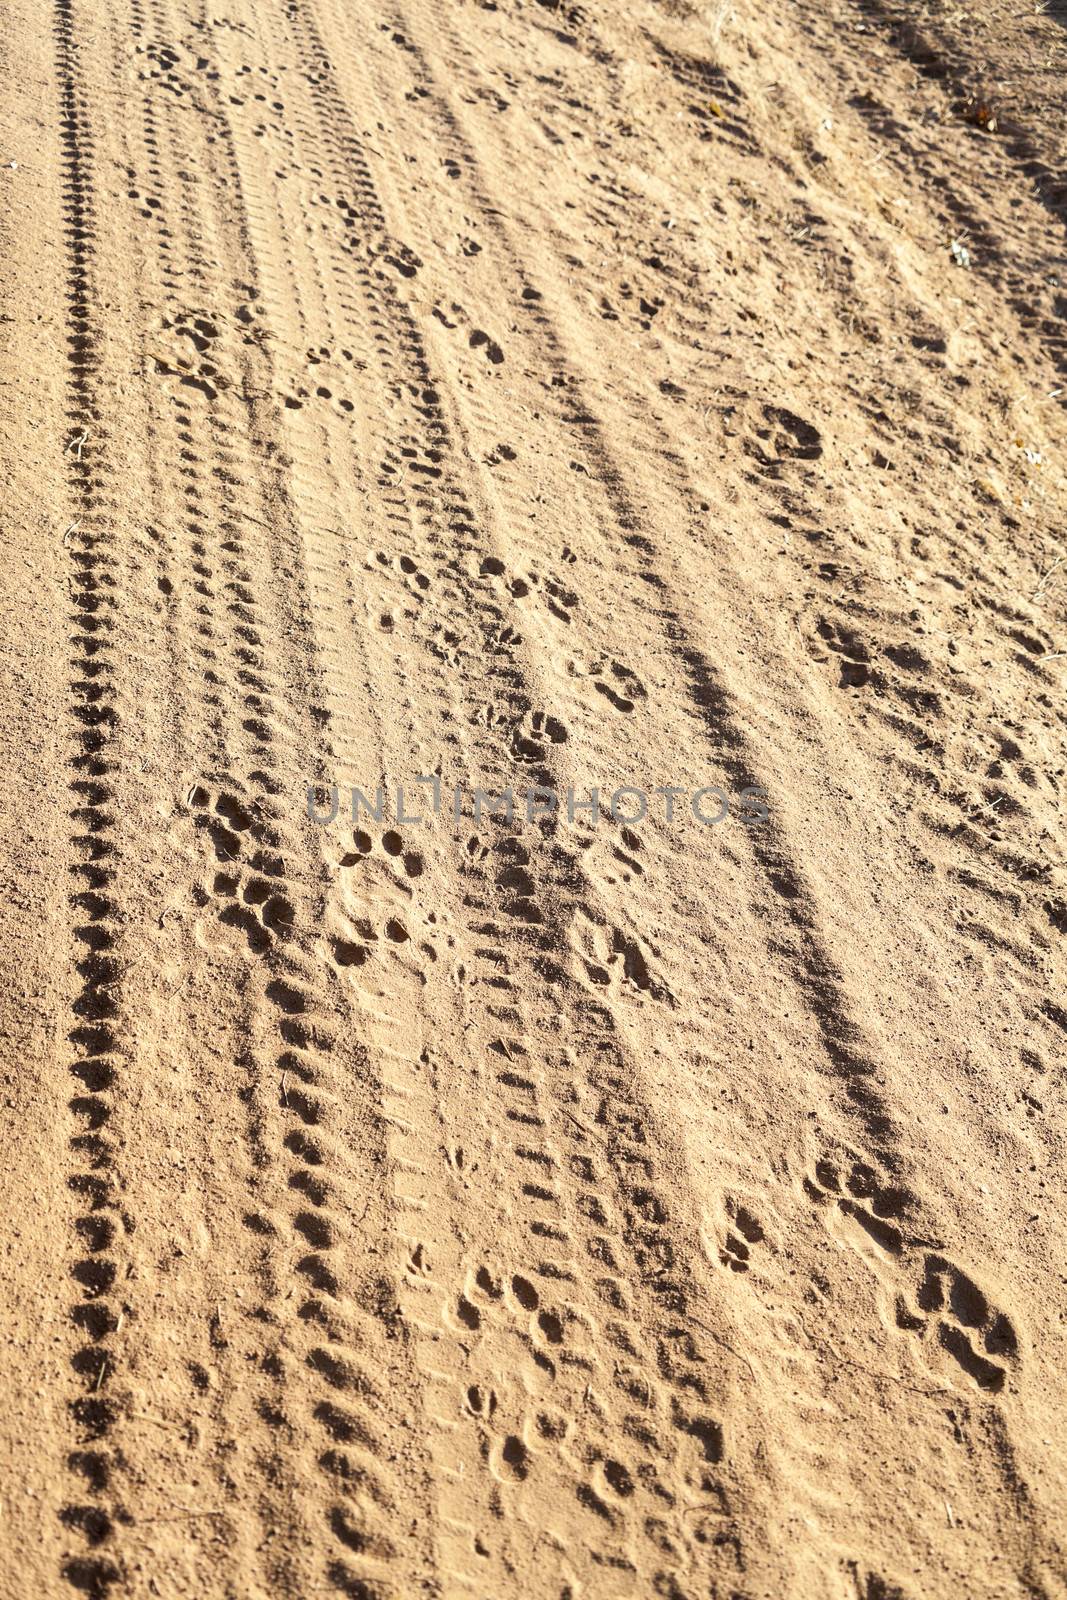 Animal and tires tracks in the sand on a safari in Tanzania